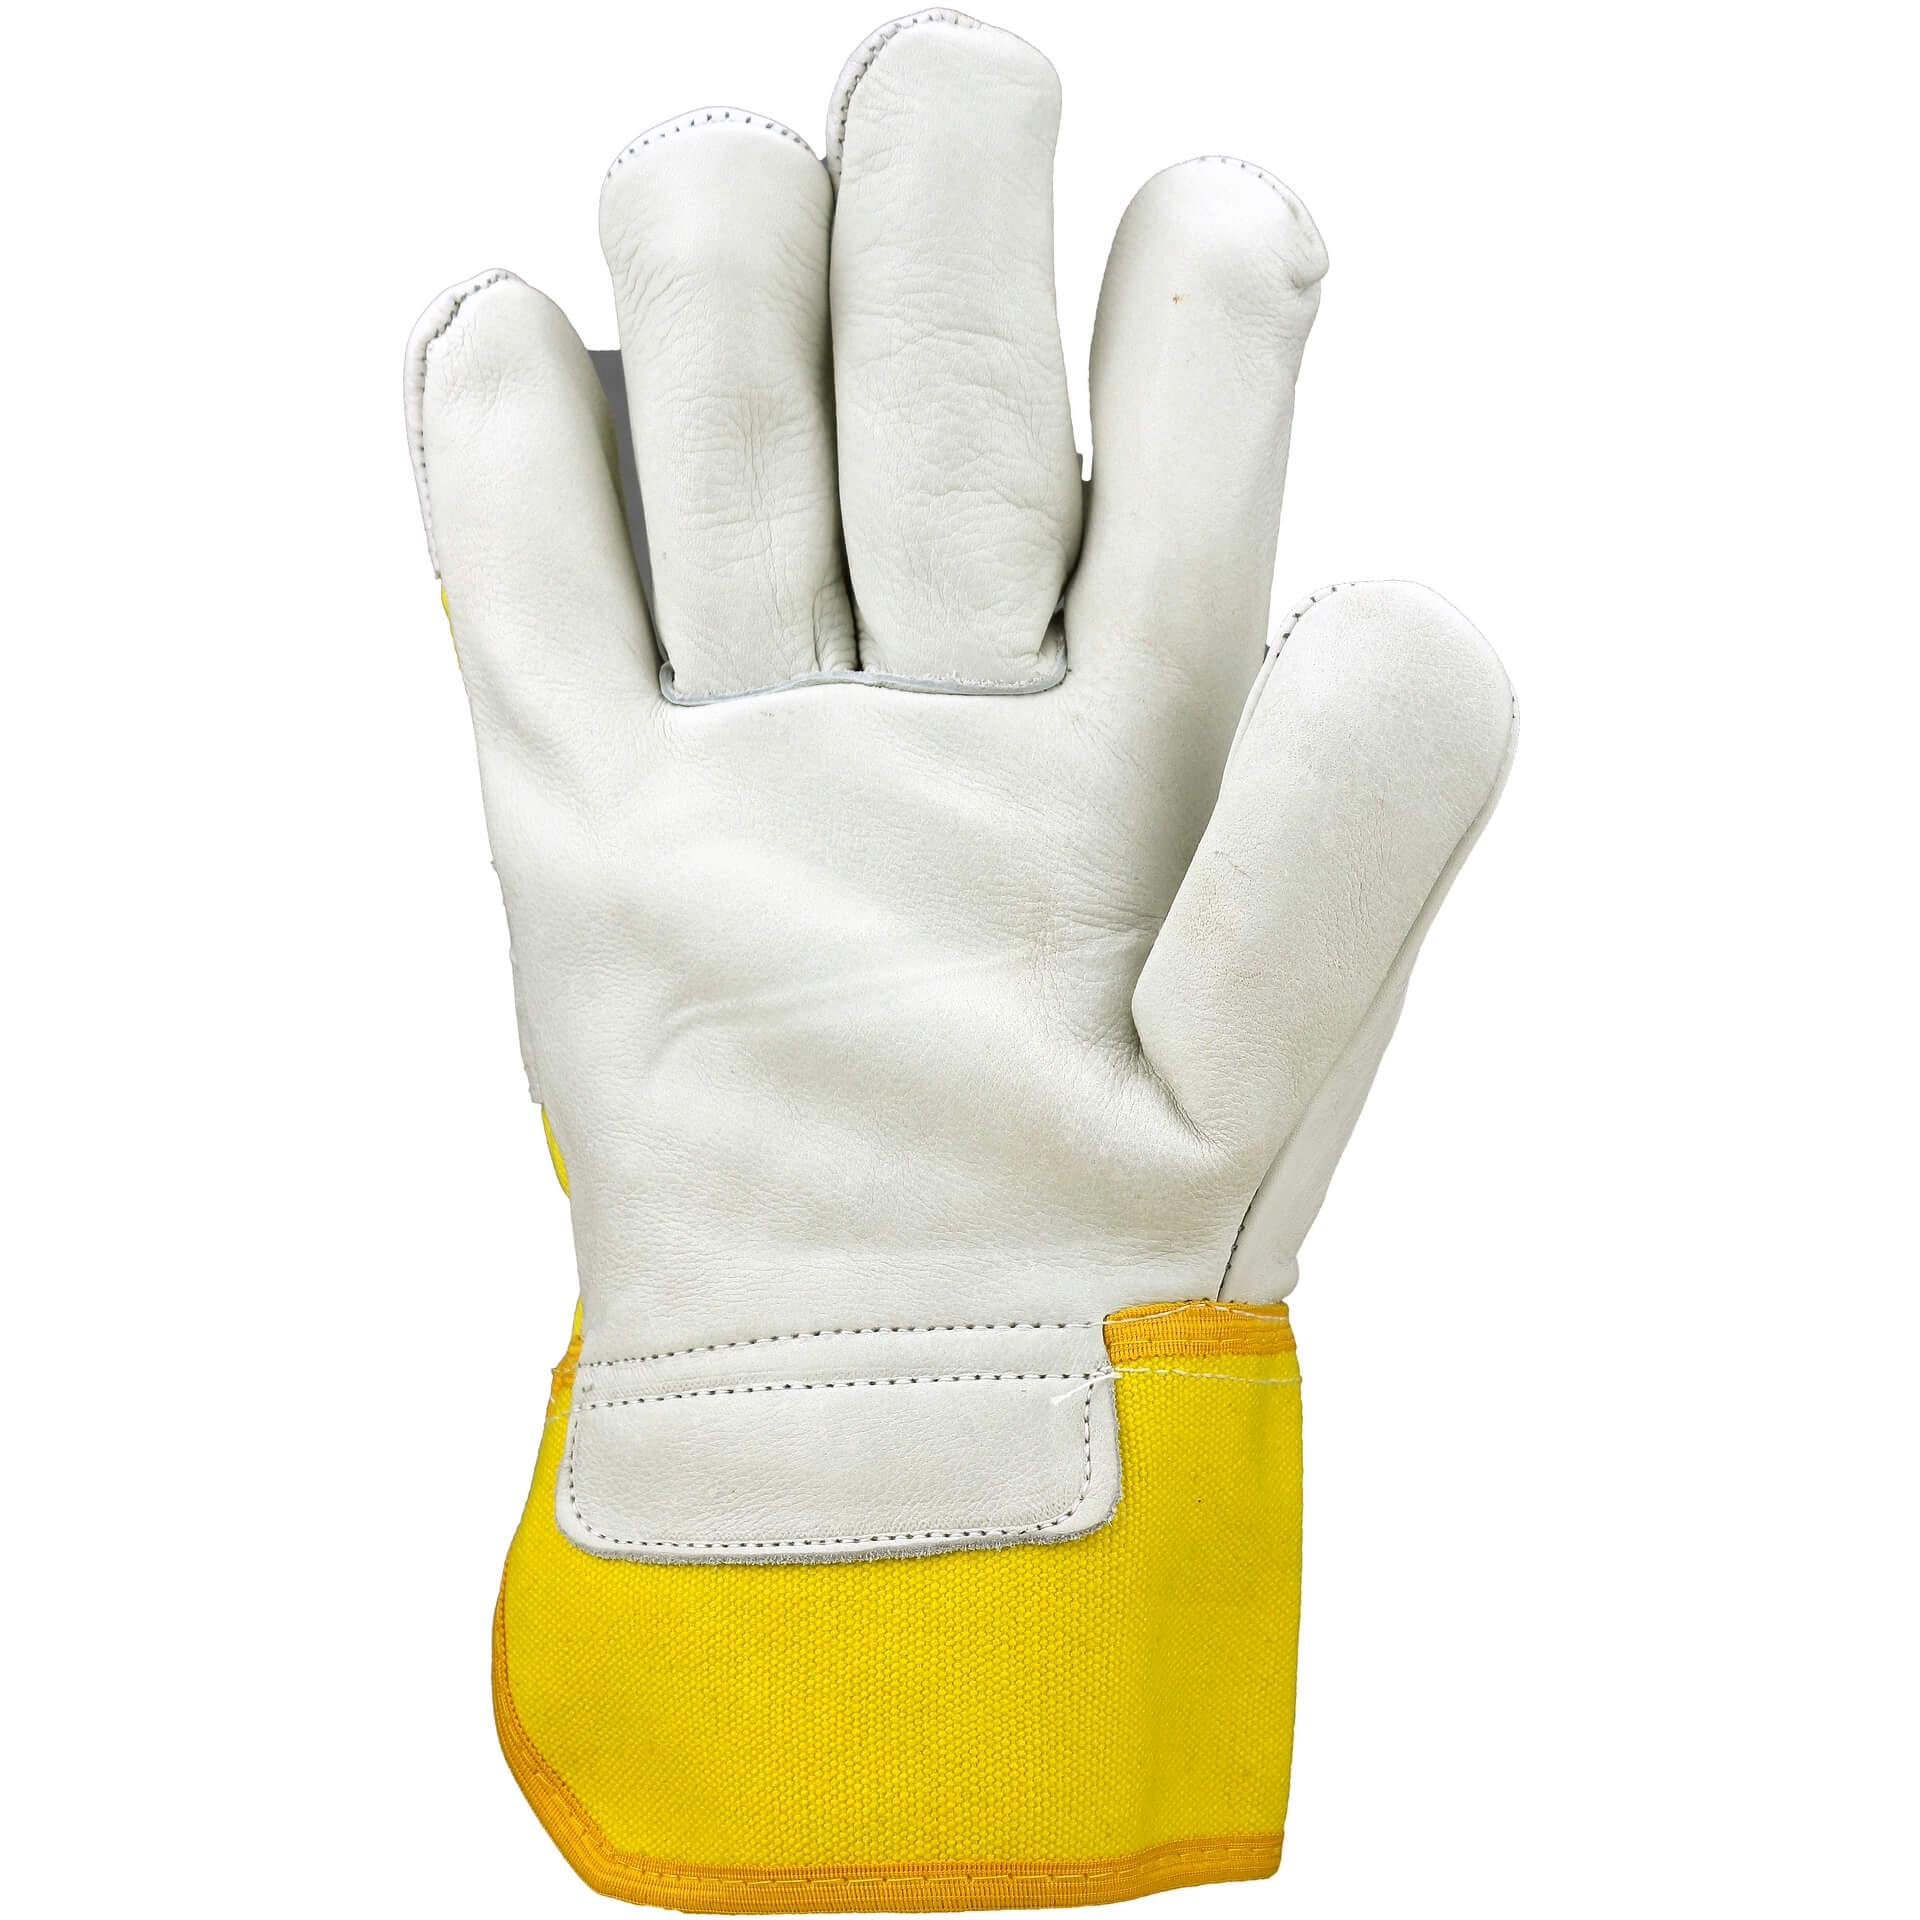 Product image Cow grain leather glove ADLER-TOP9